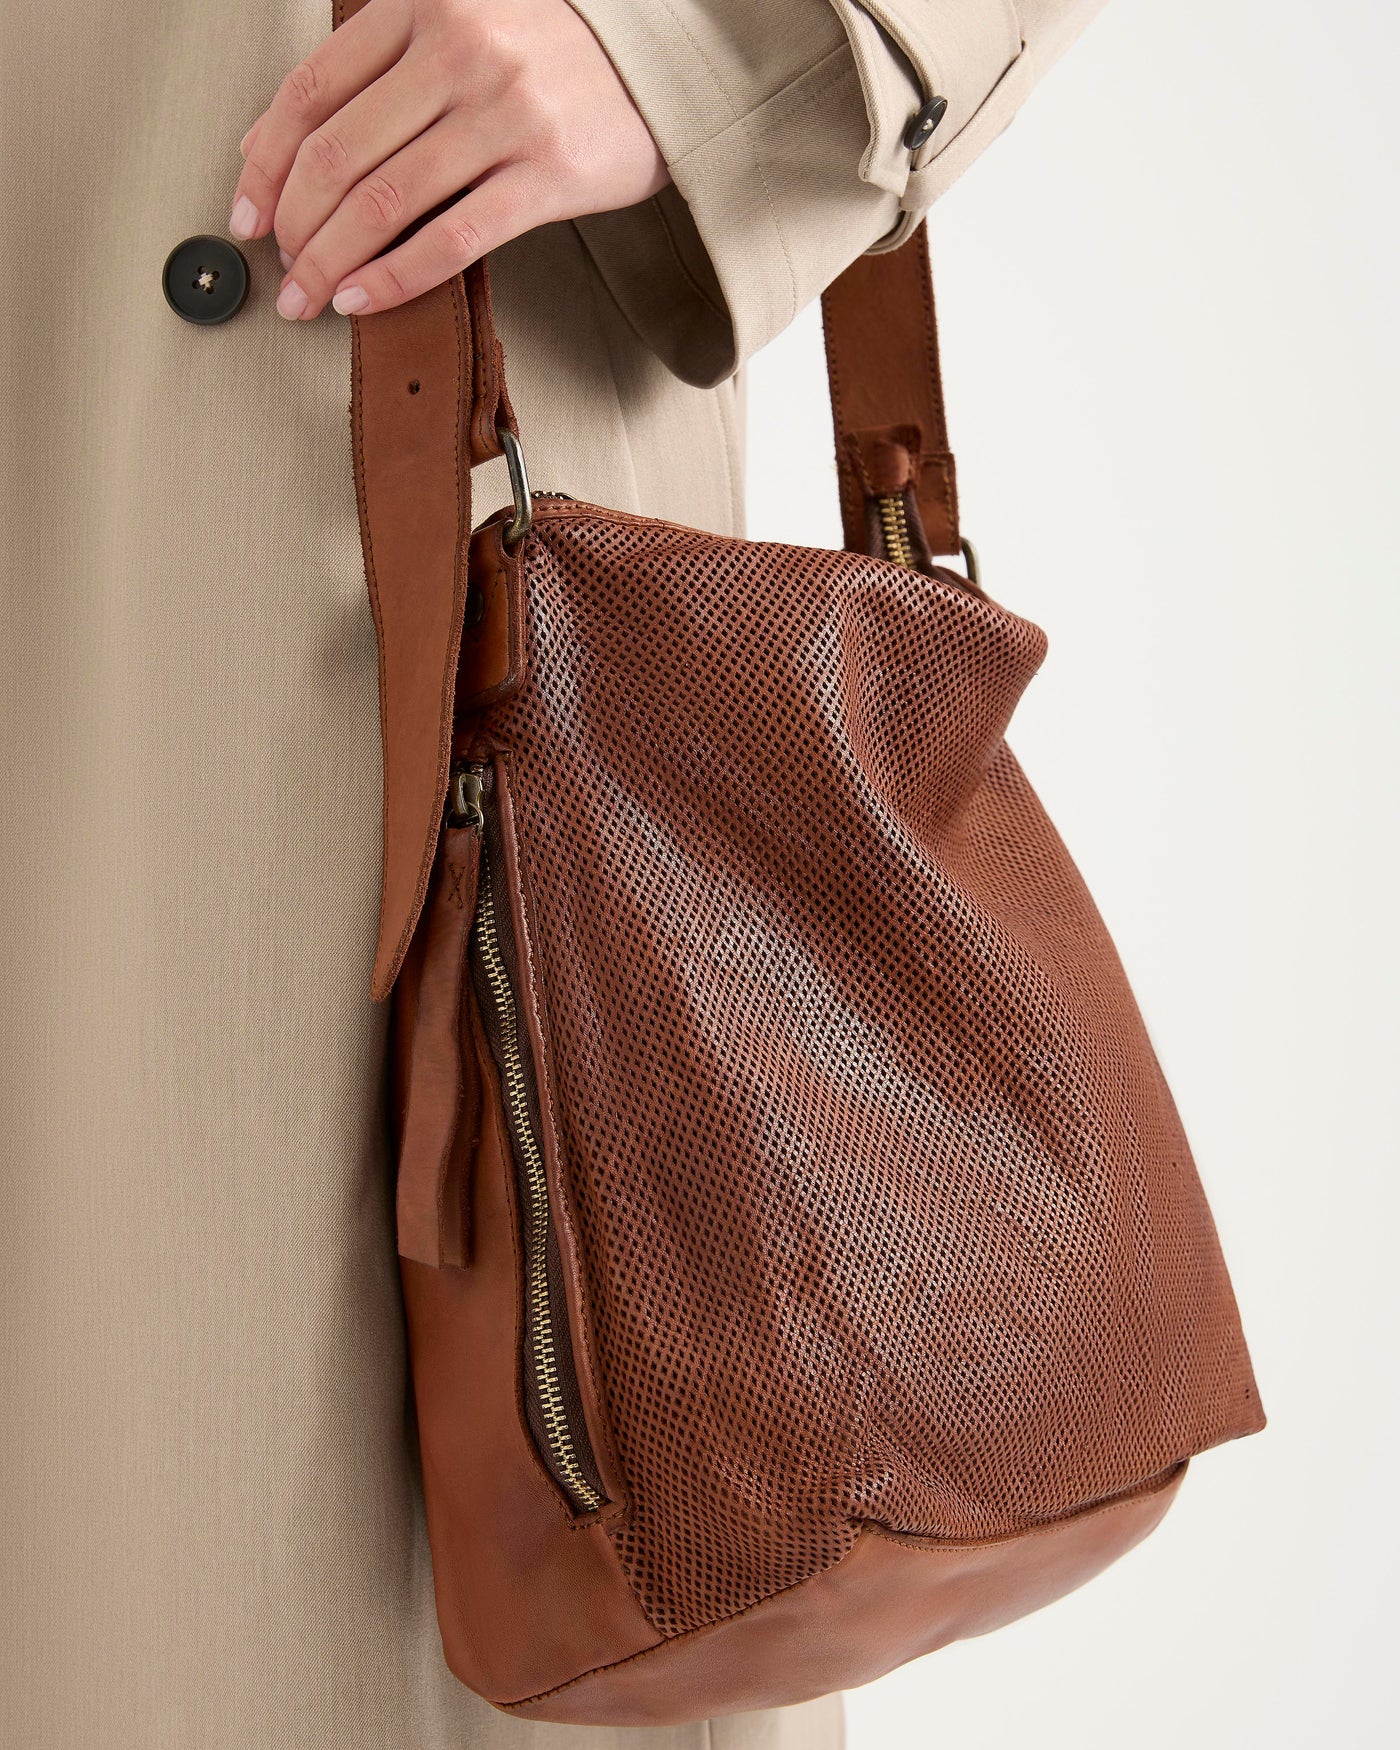 Perforated Slouchy Cognac